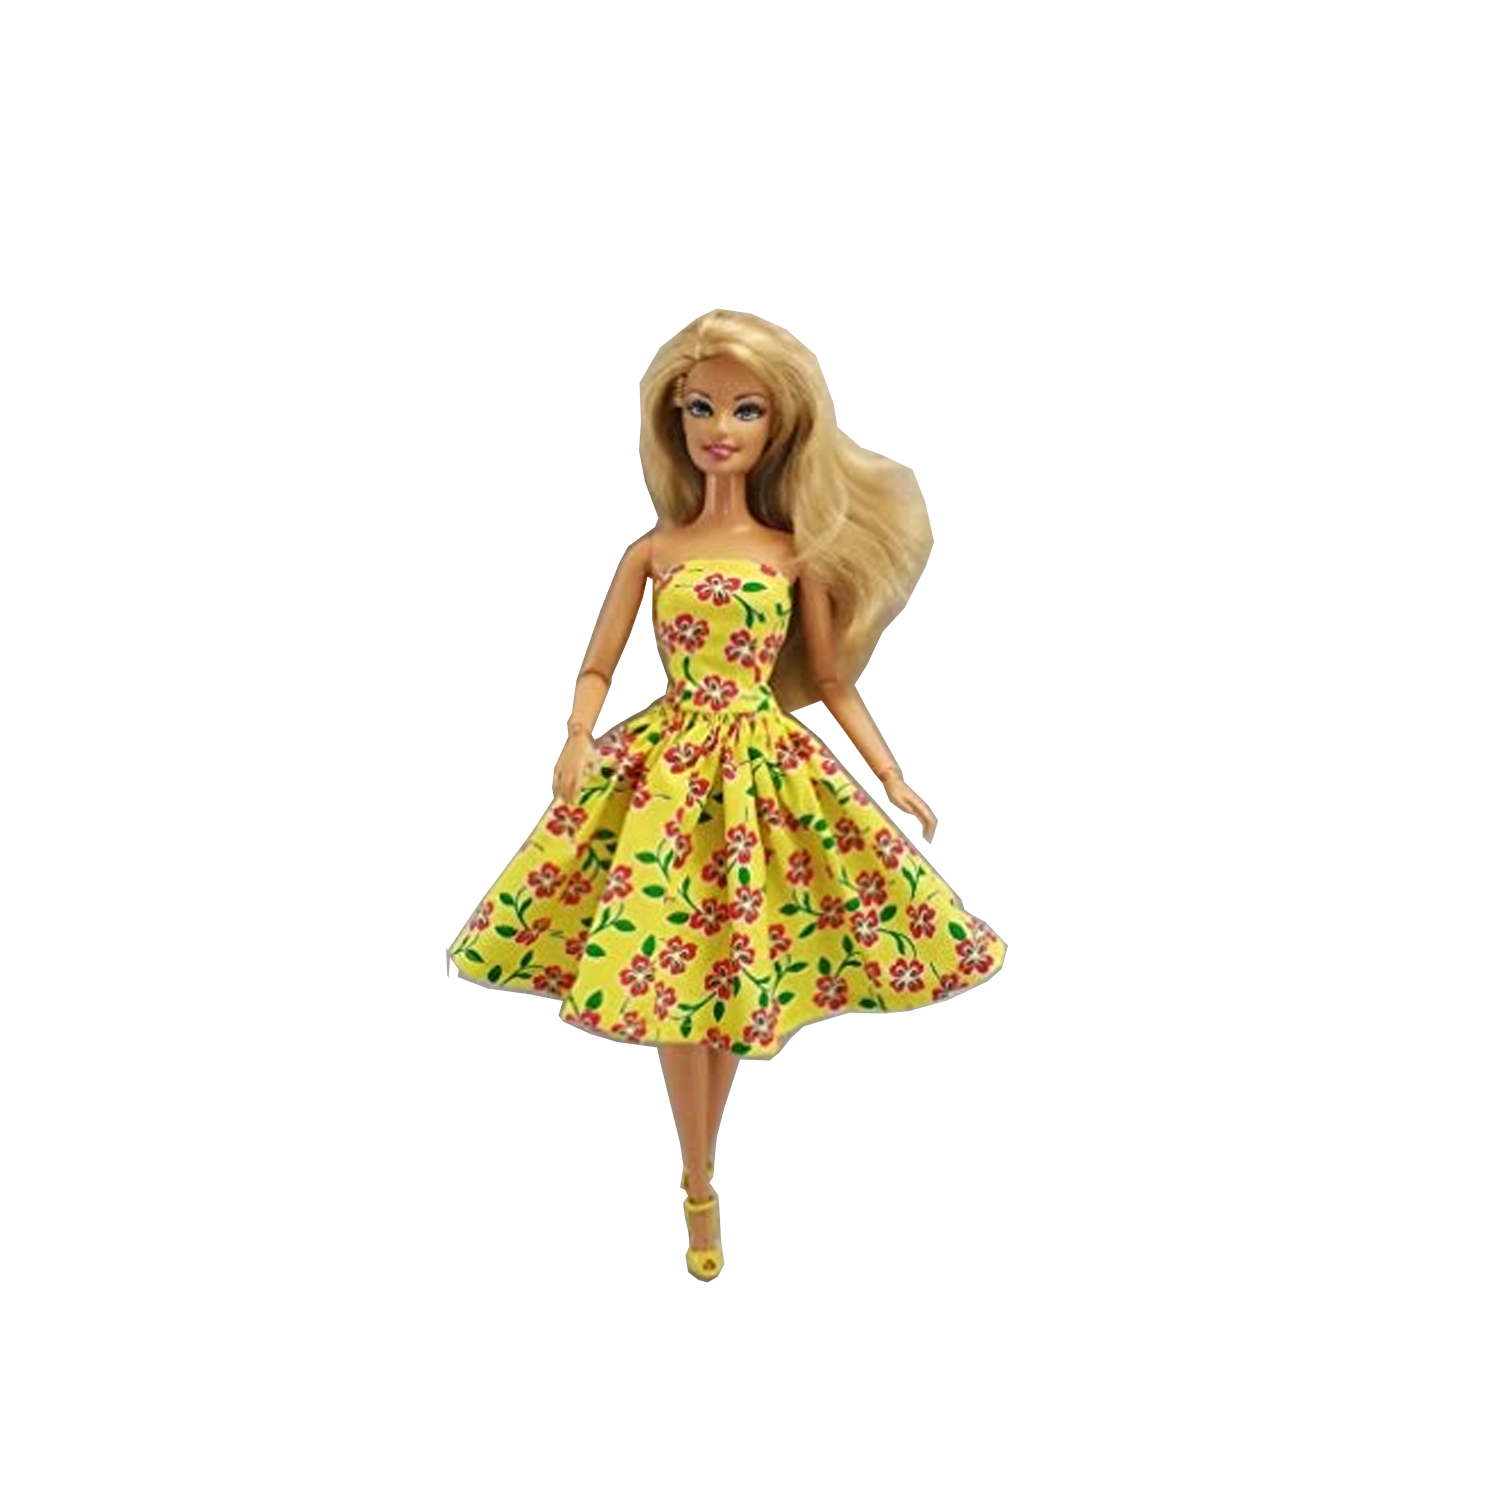 BARBIE Creative Craft - Creative Craft . Buy Barbie toys in India. shop for  BARBIE products in India. | Flipkart.com